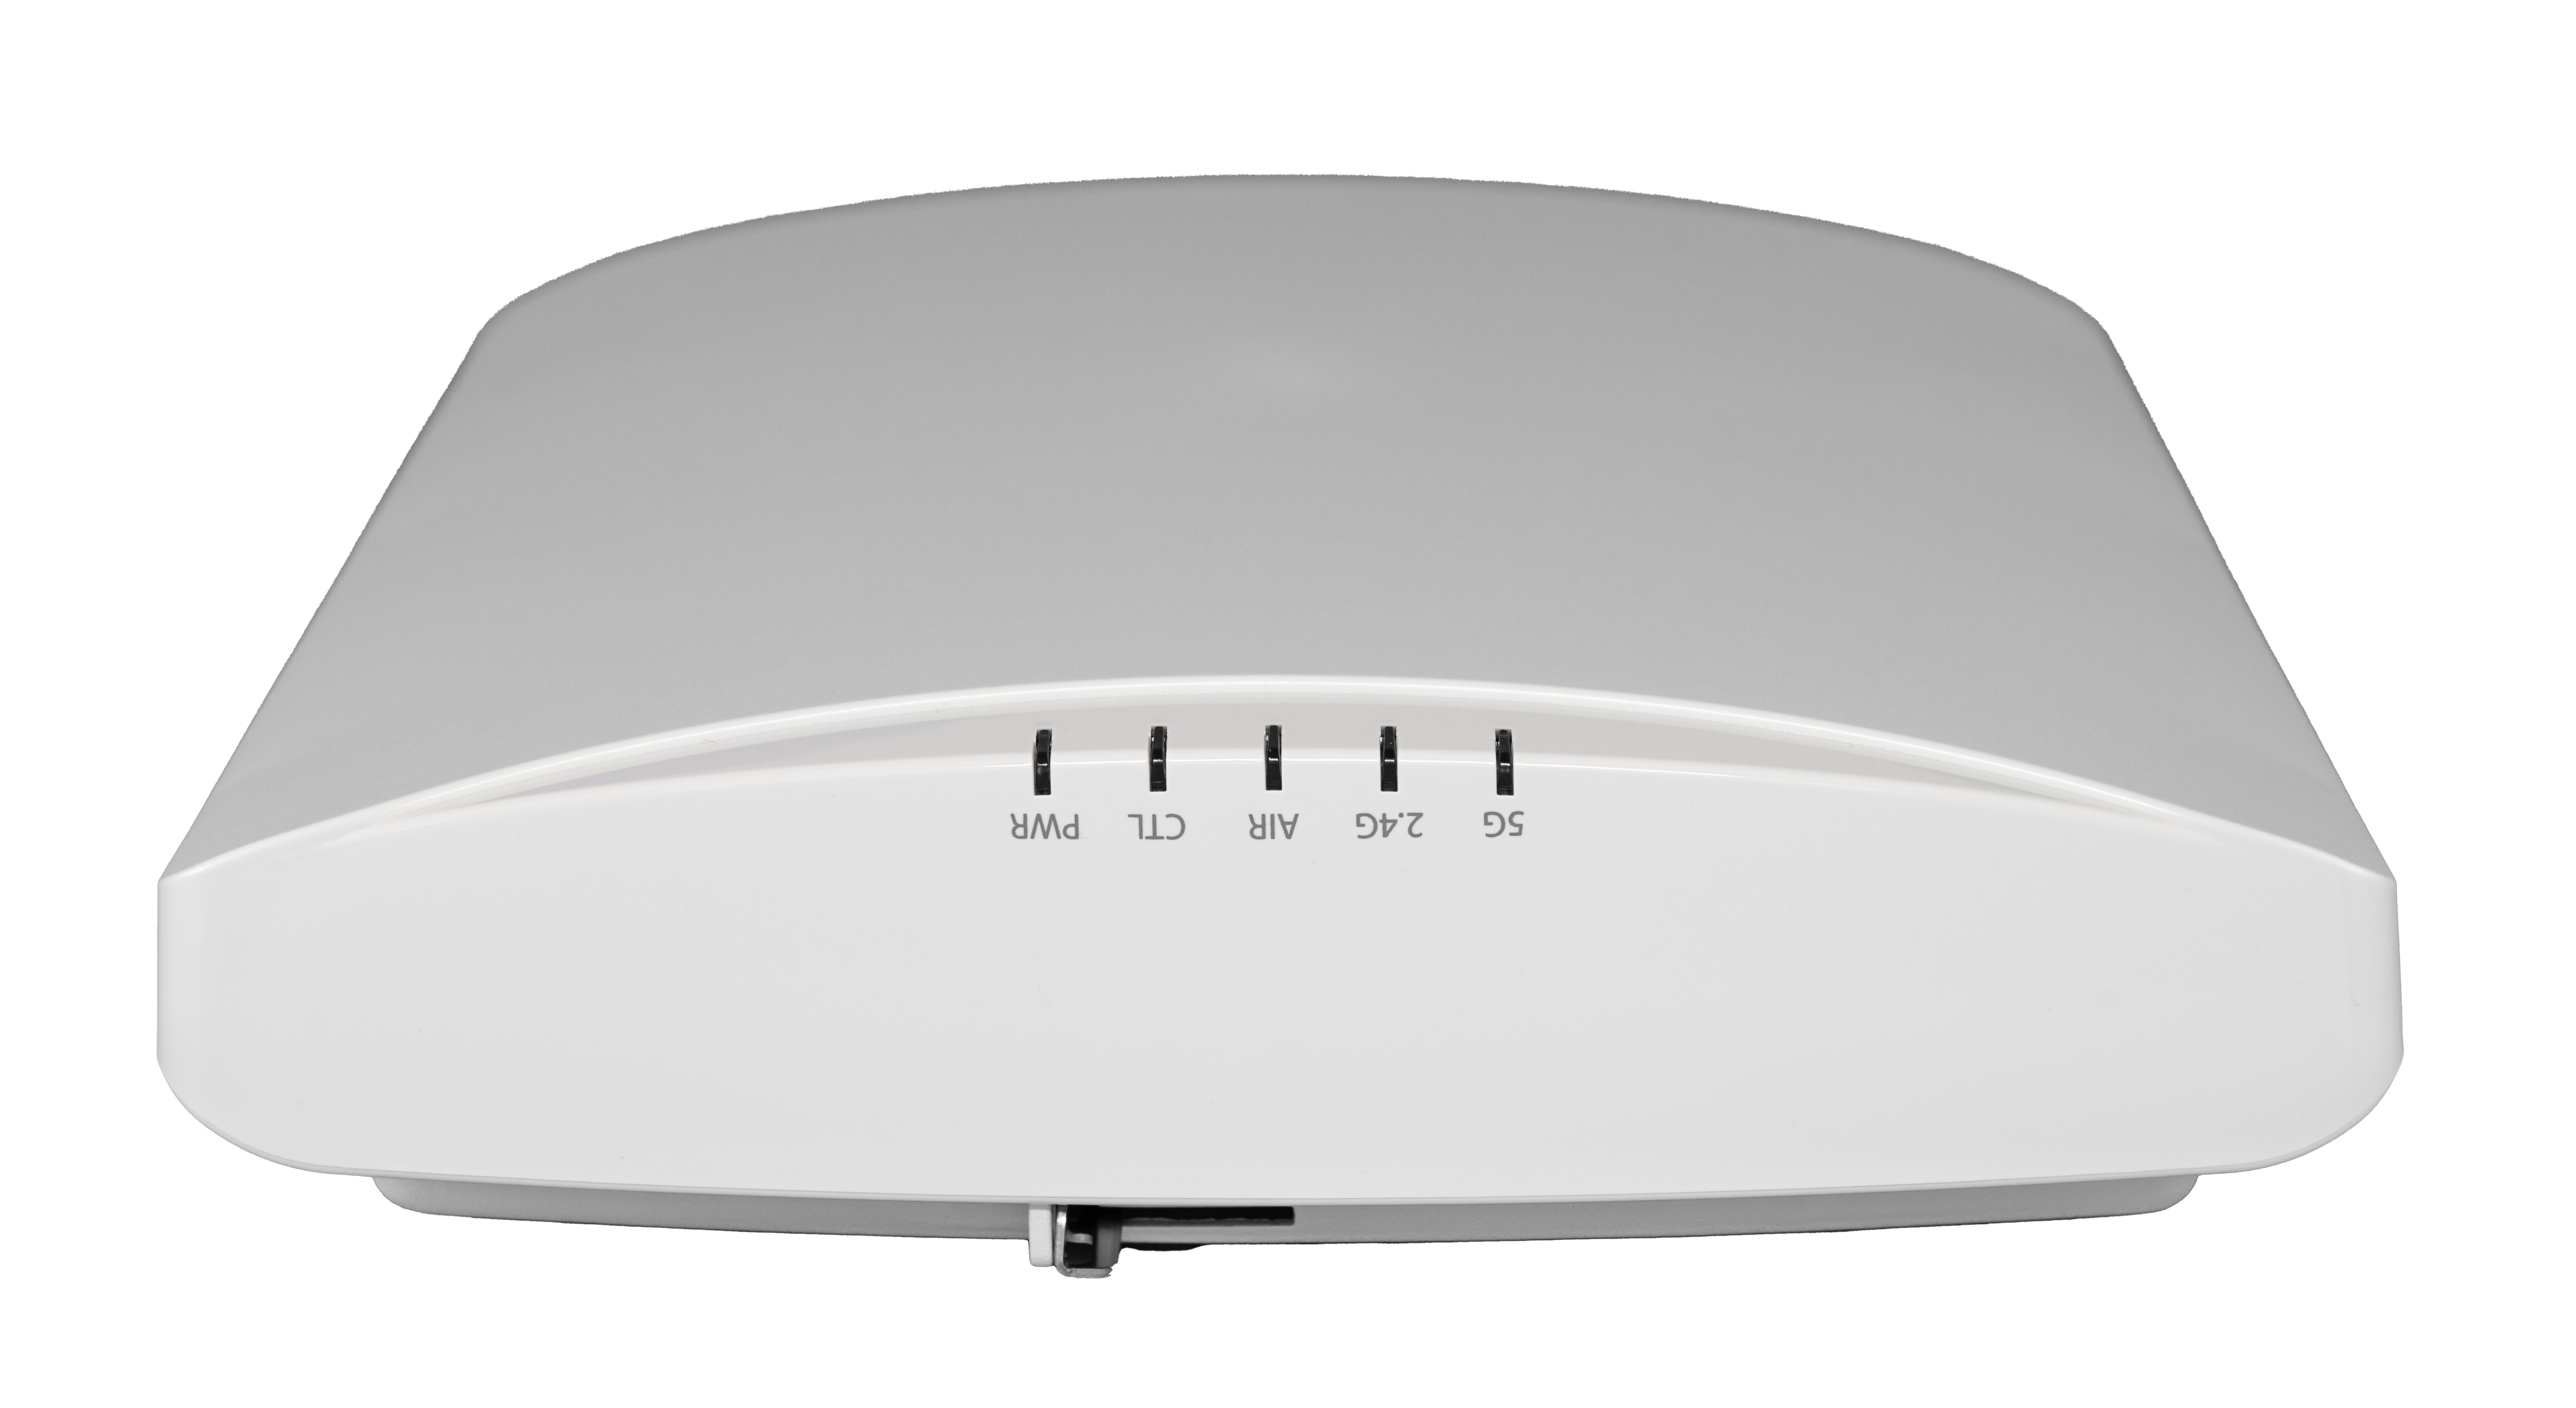 R850 RUCKUS R850 Indoor Access Point RUCKUS R850 Access Point Front View hi res